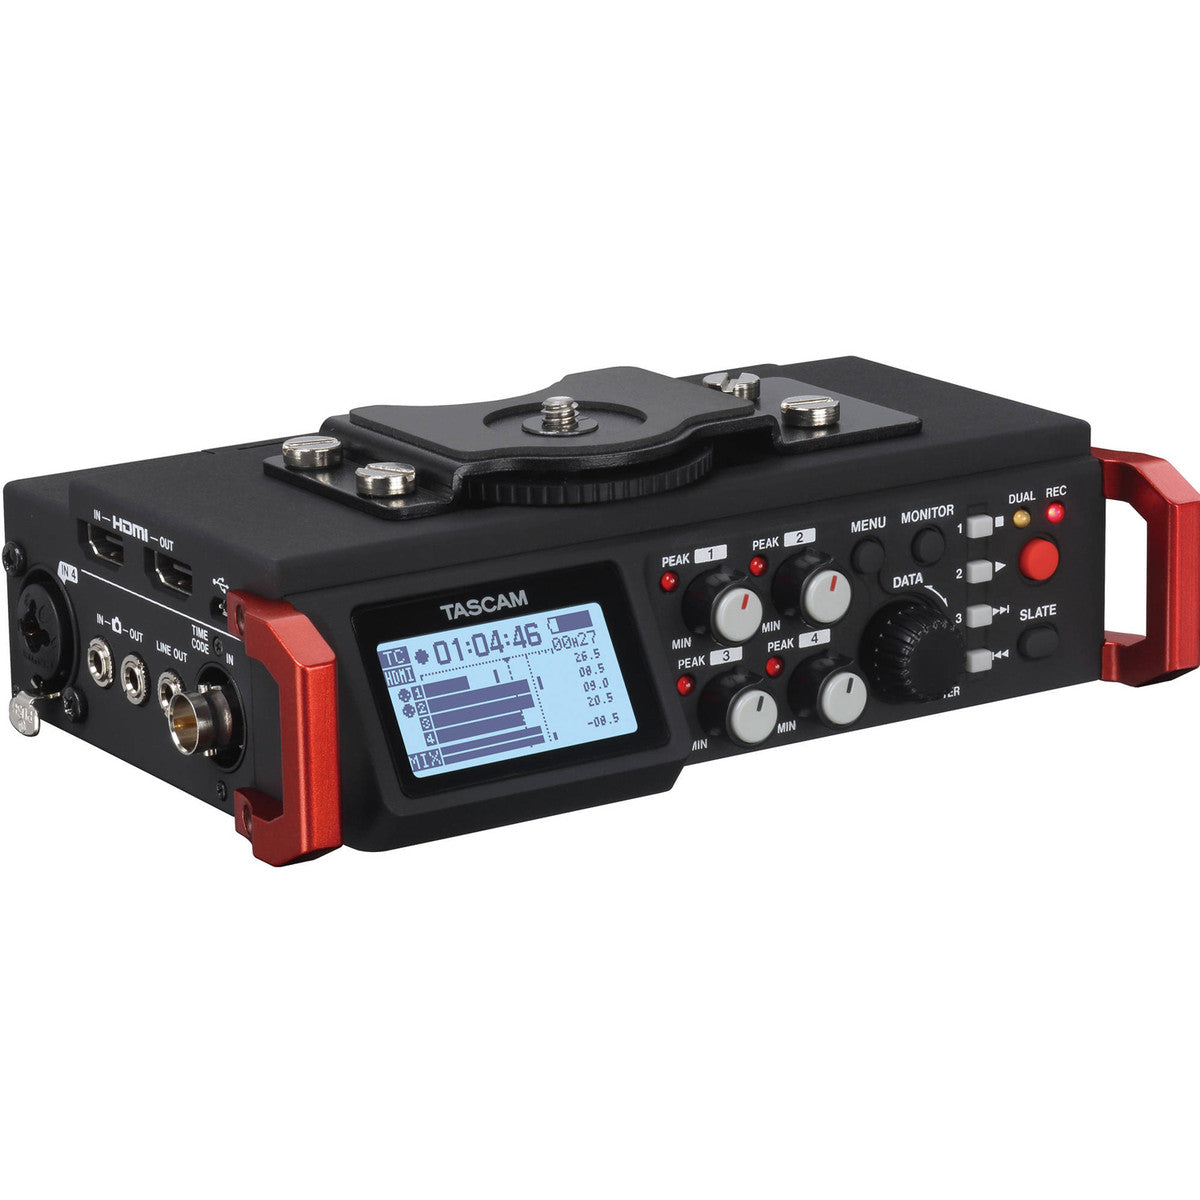 Tascam DR-701D 6-track Portable Recorder for Video Production